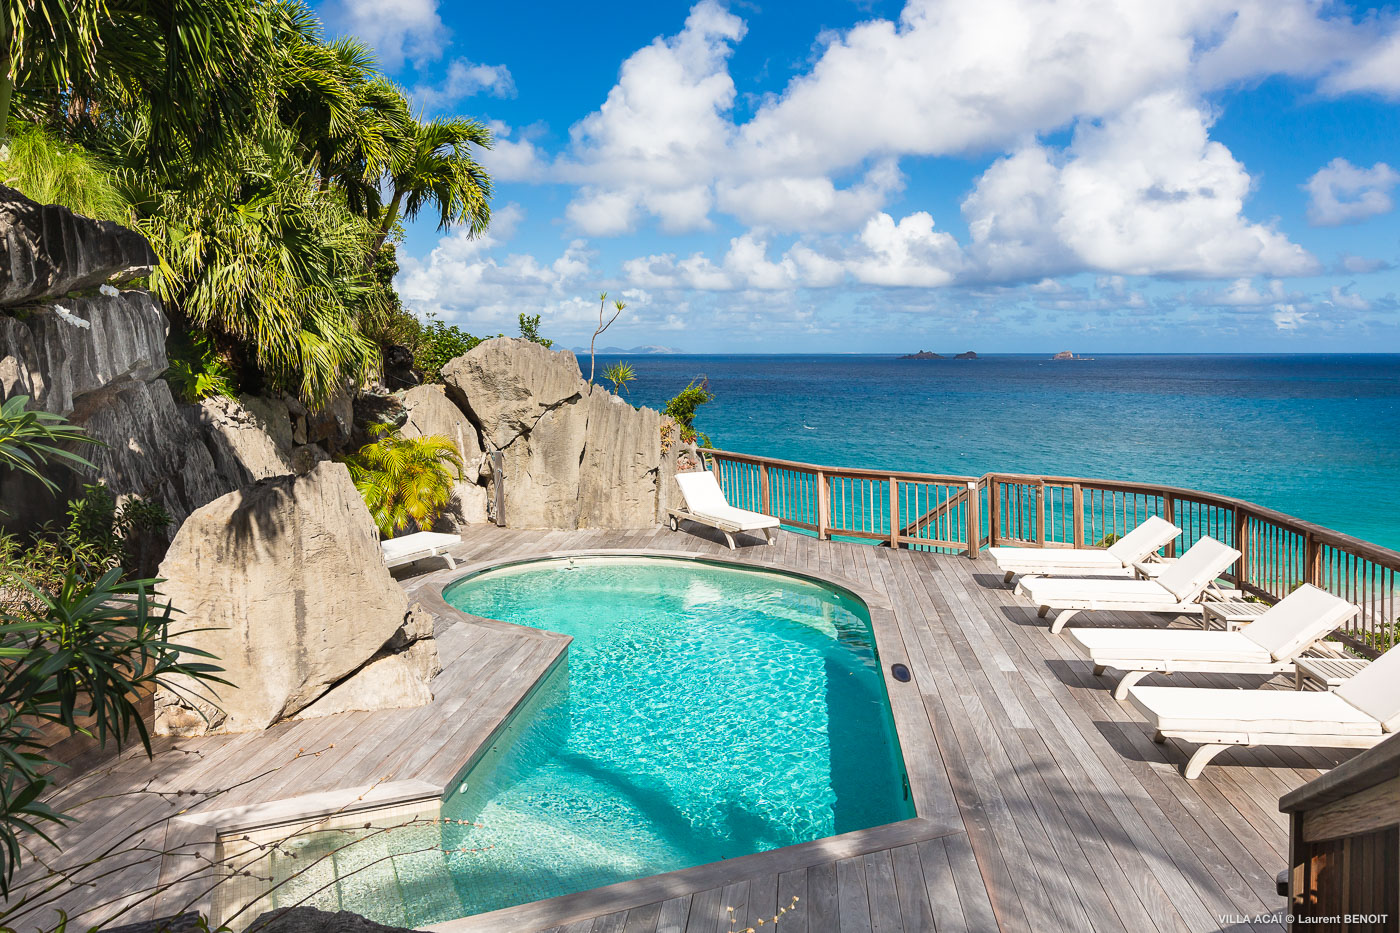 3 bedrooms Villa St Barth , full of charm with a nice tropical touch